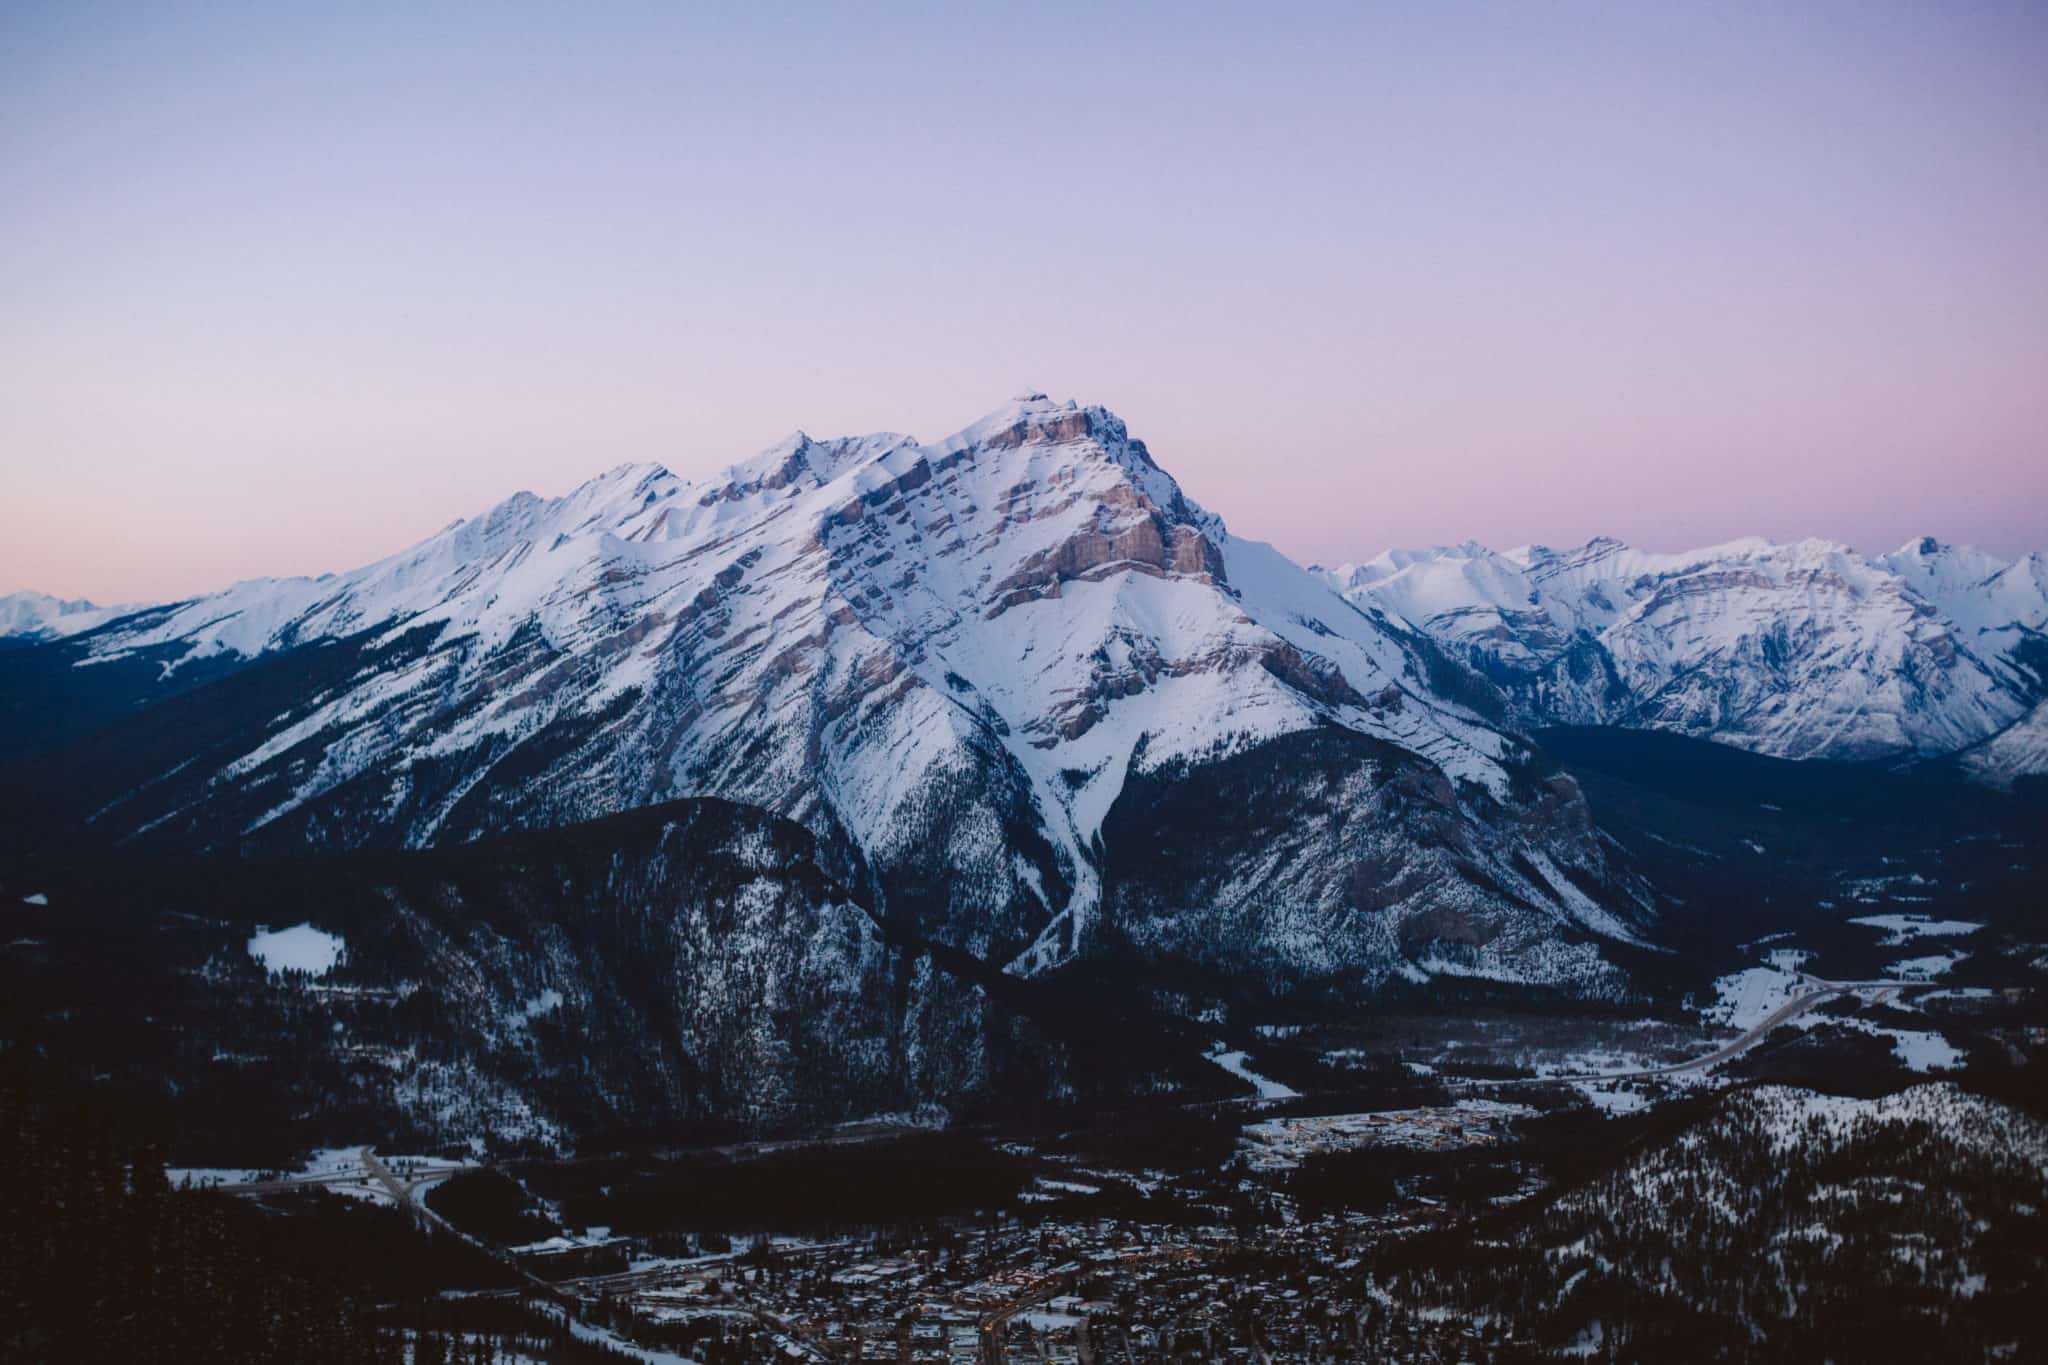 The Essential Guide To The Banff Gondola in The Winter – Best Photography Spots + More